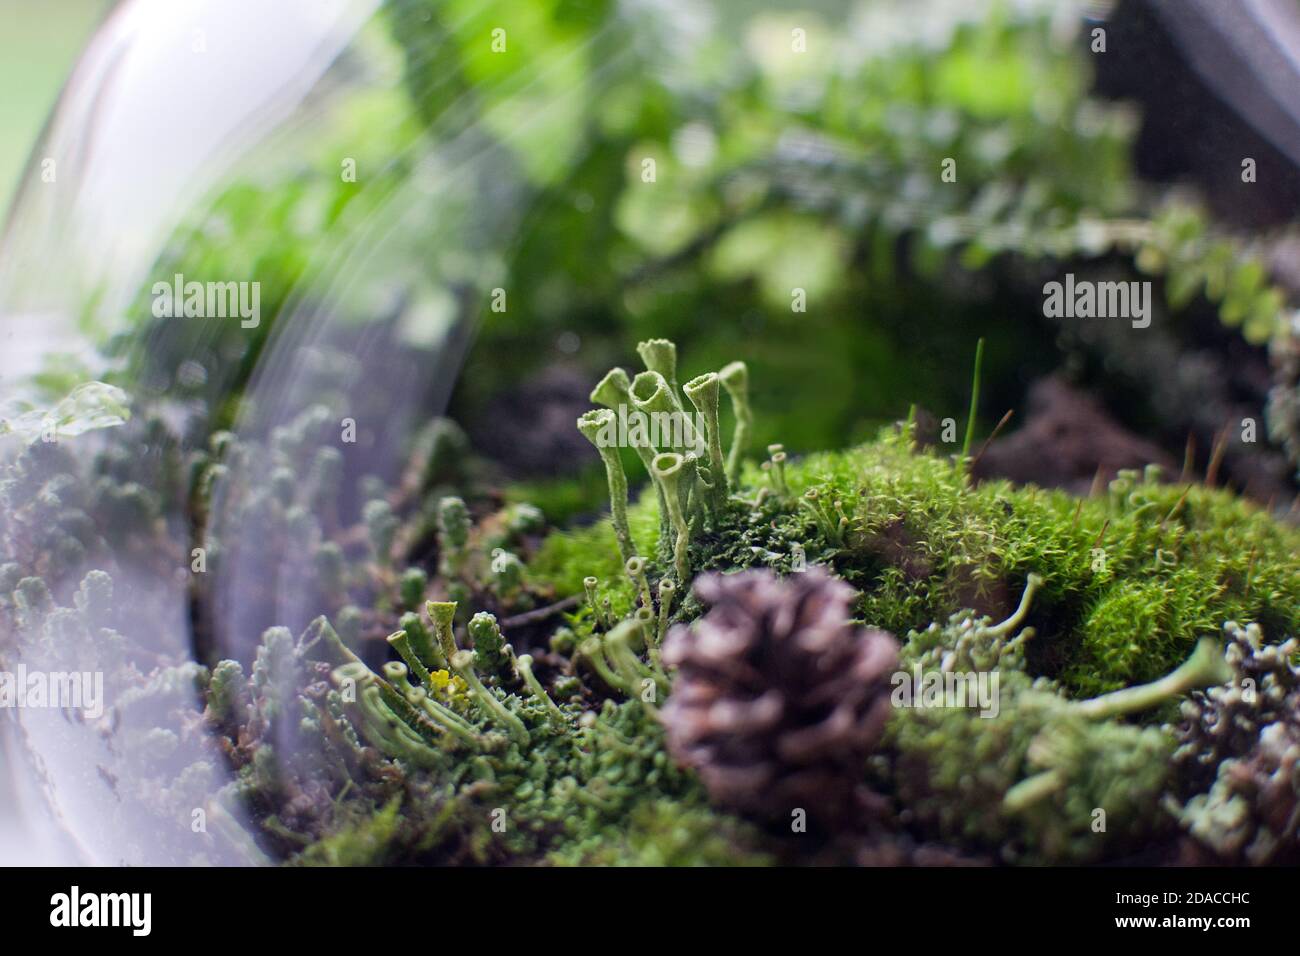 Glass florarium with Doryopteris Cordata plant, different kinds of moss, lichen (Cladonia fimbriata). Forest at home concept. Stock Photo